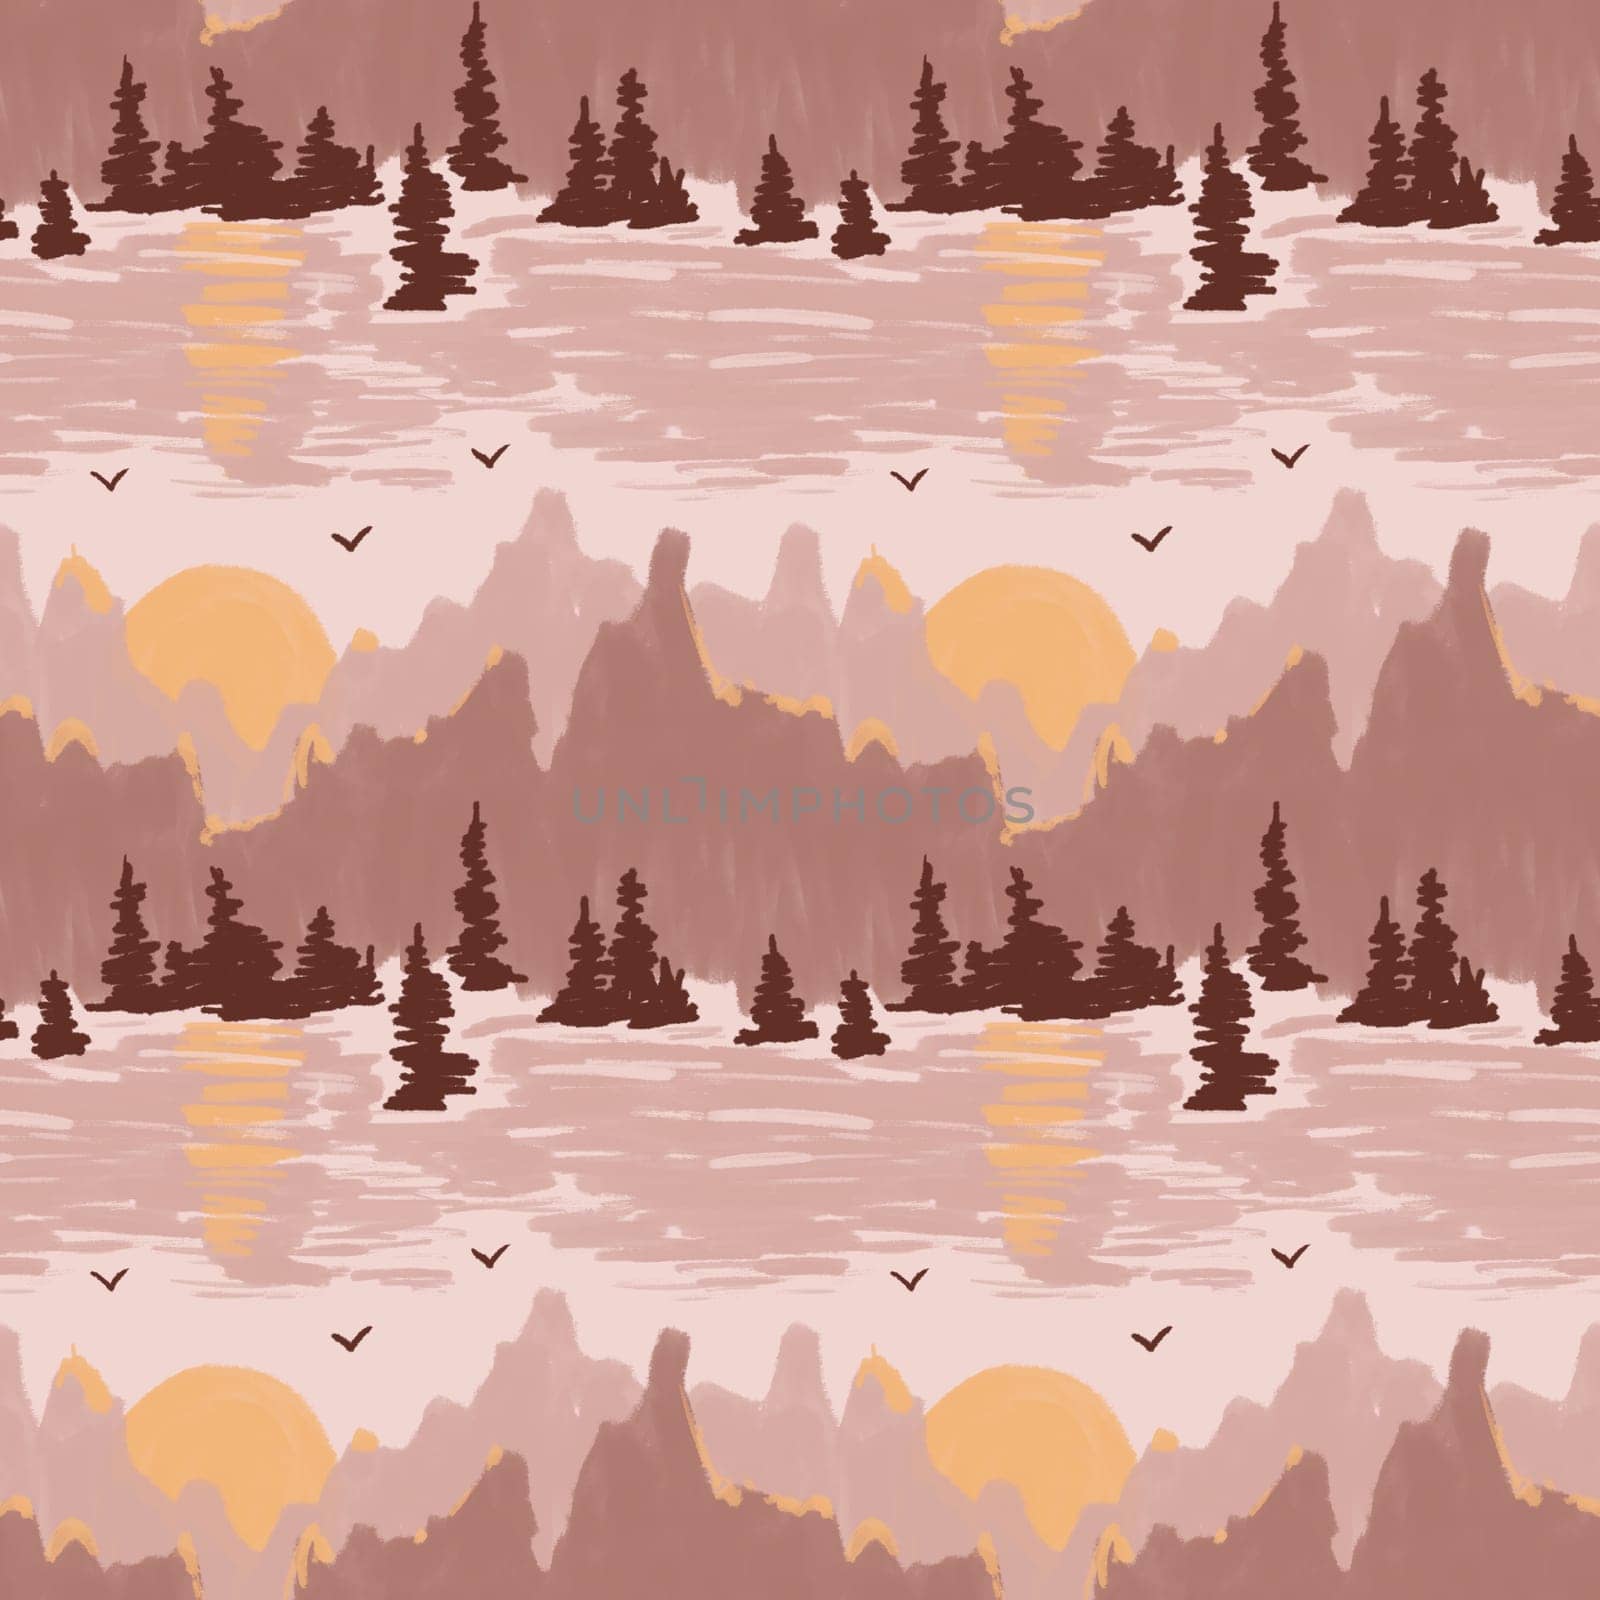 Hnd drawn seamless pattern with beige brown mountain range peaks, yellow sun surise sunset. Skiing outdoor activities tourism concept. Nature landscape